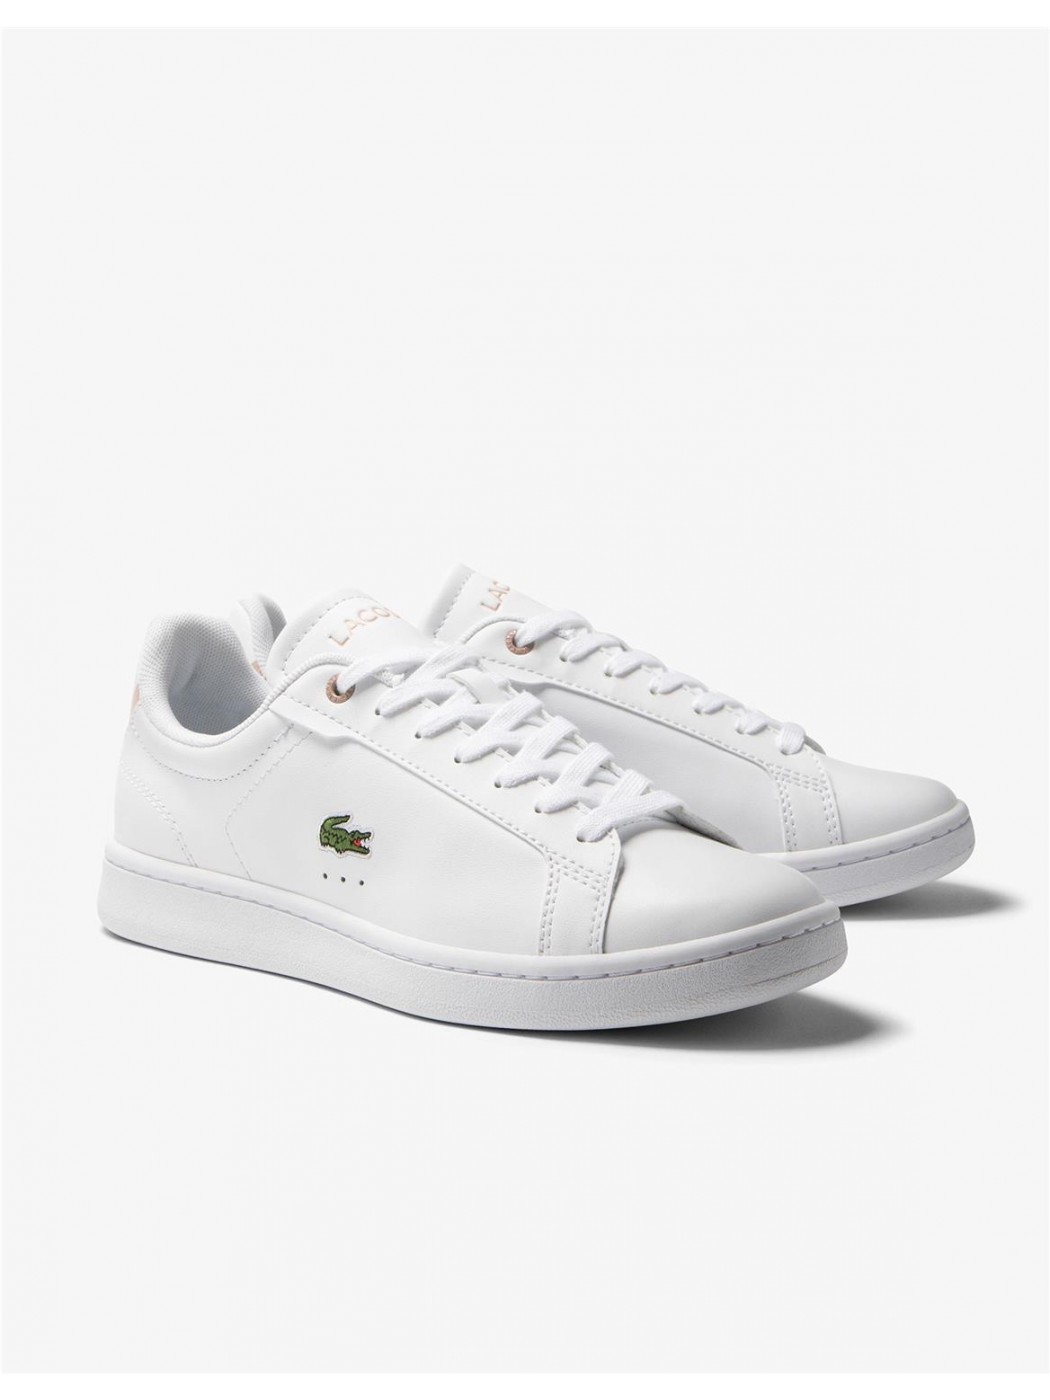 ZAPATILLAS LACOSTE MUJER CARNABY PRO LEATHER BLANCO